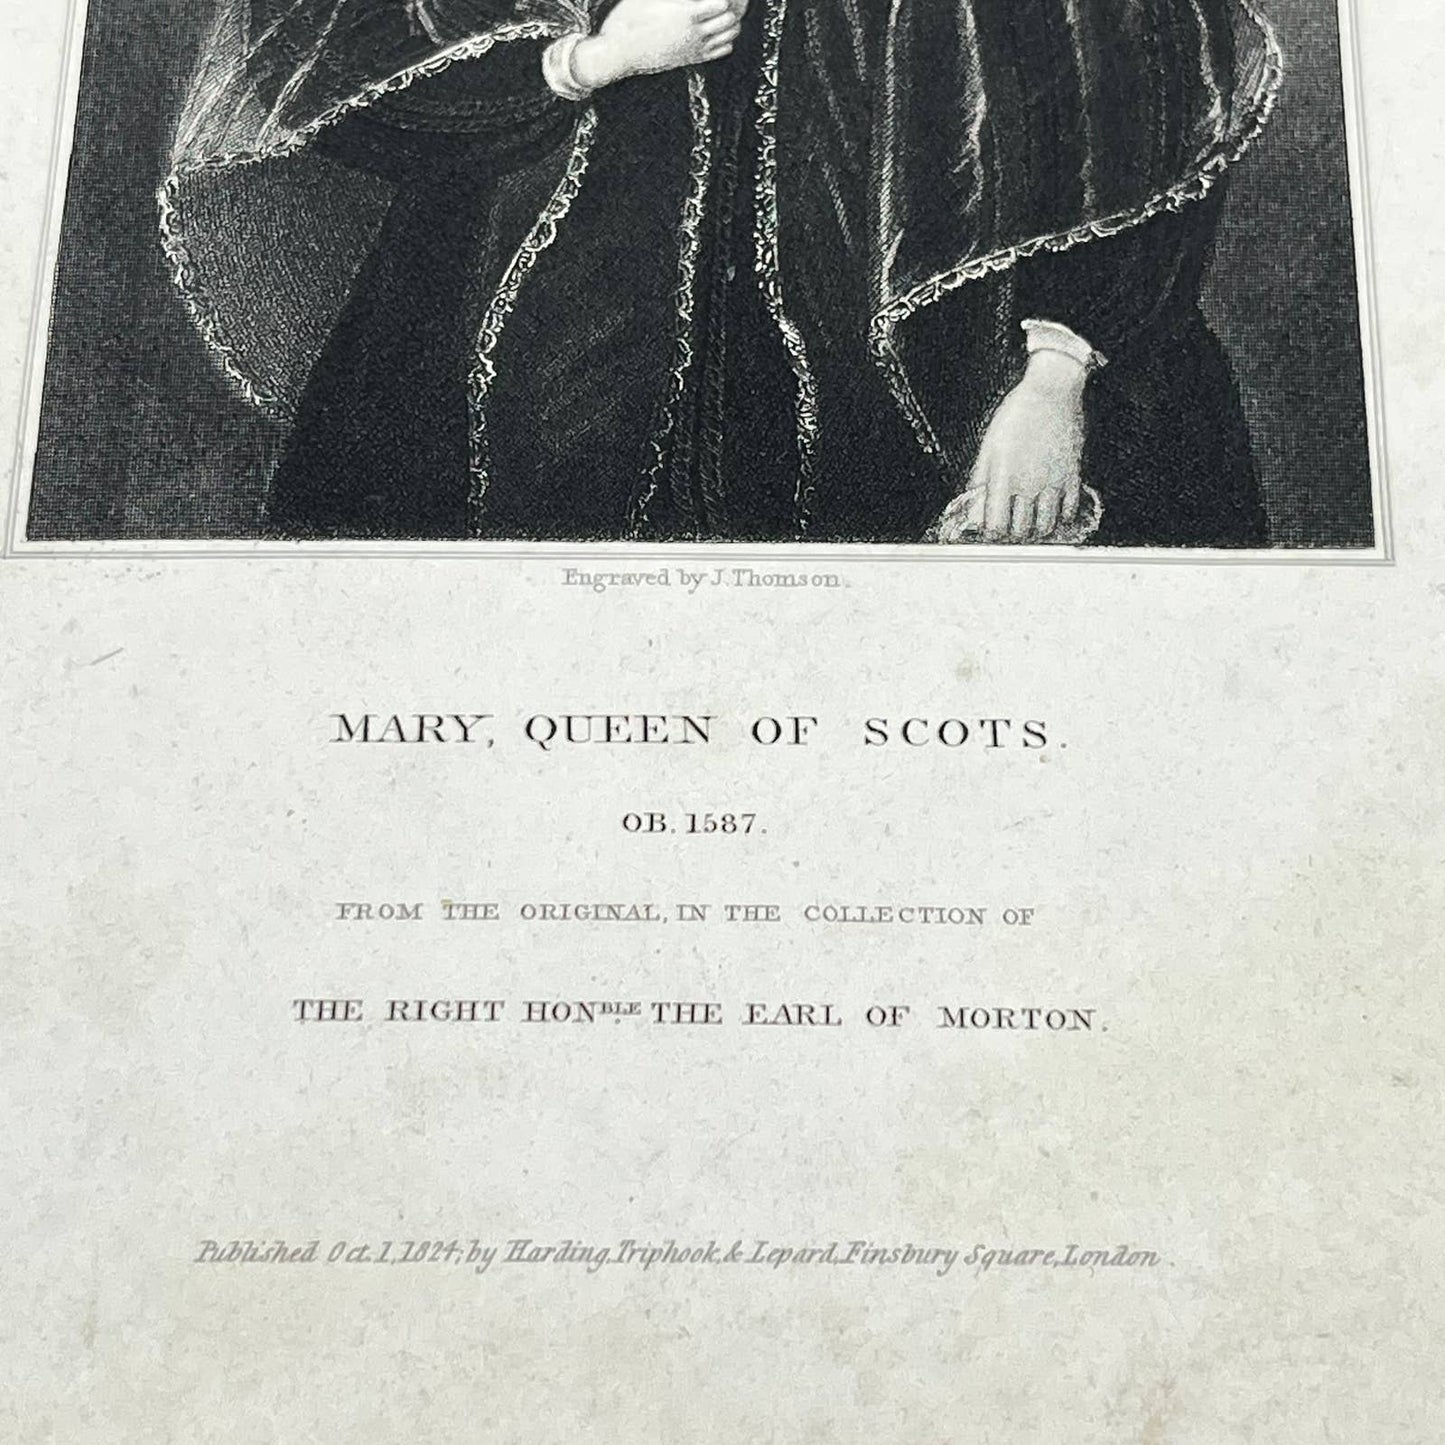 1824 Engraving Art Print Mary Queen of Scots 1587 AB3